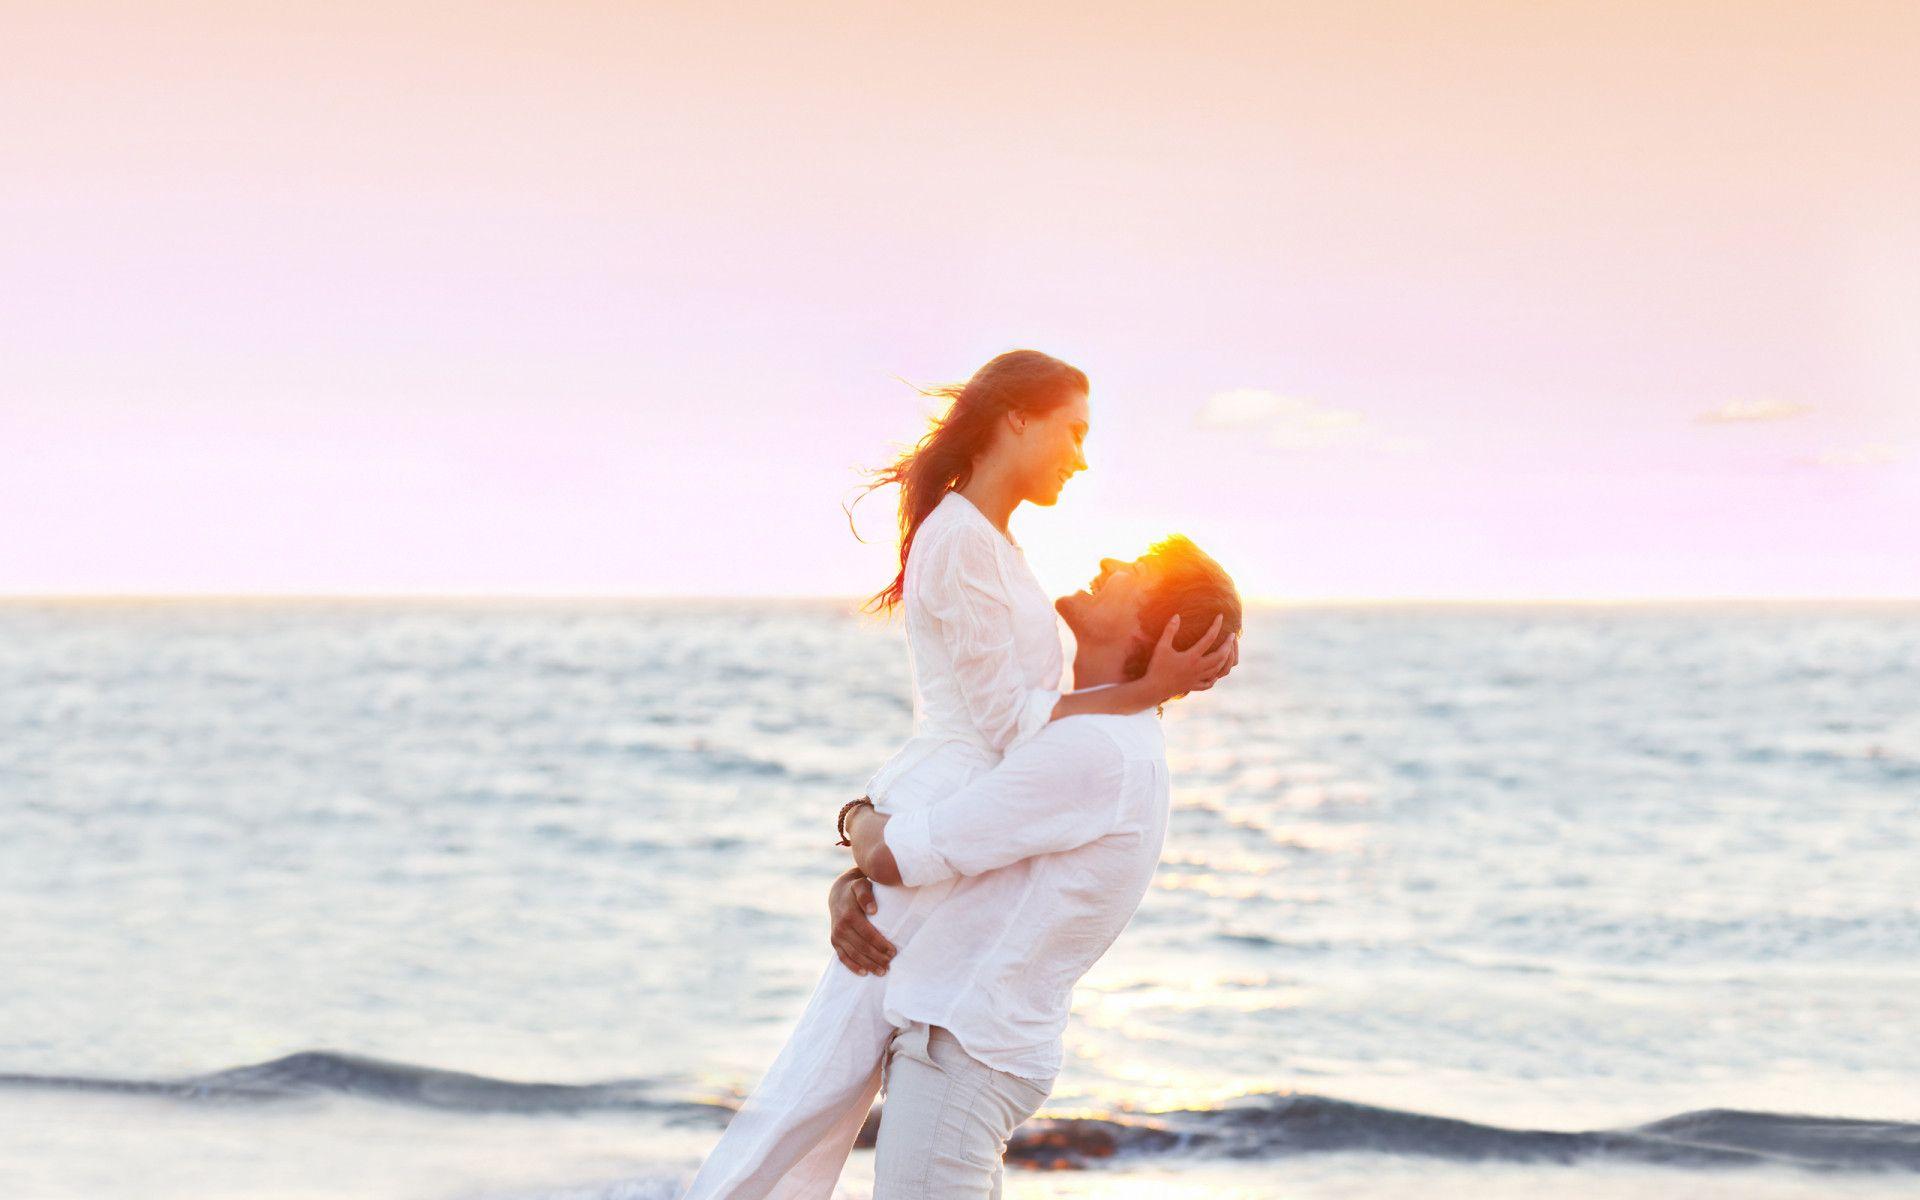 Lovely Couple on the Beach widescreen wallpaper. Wide